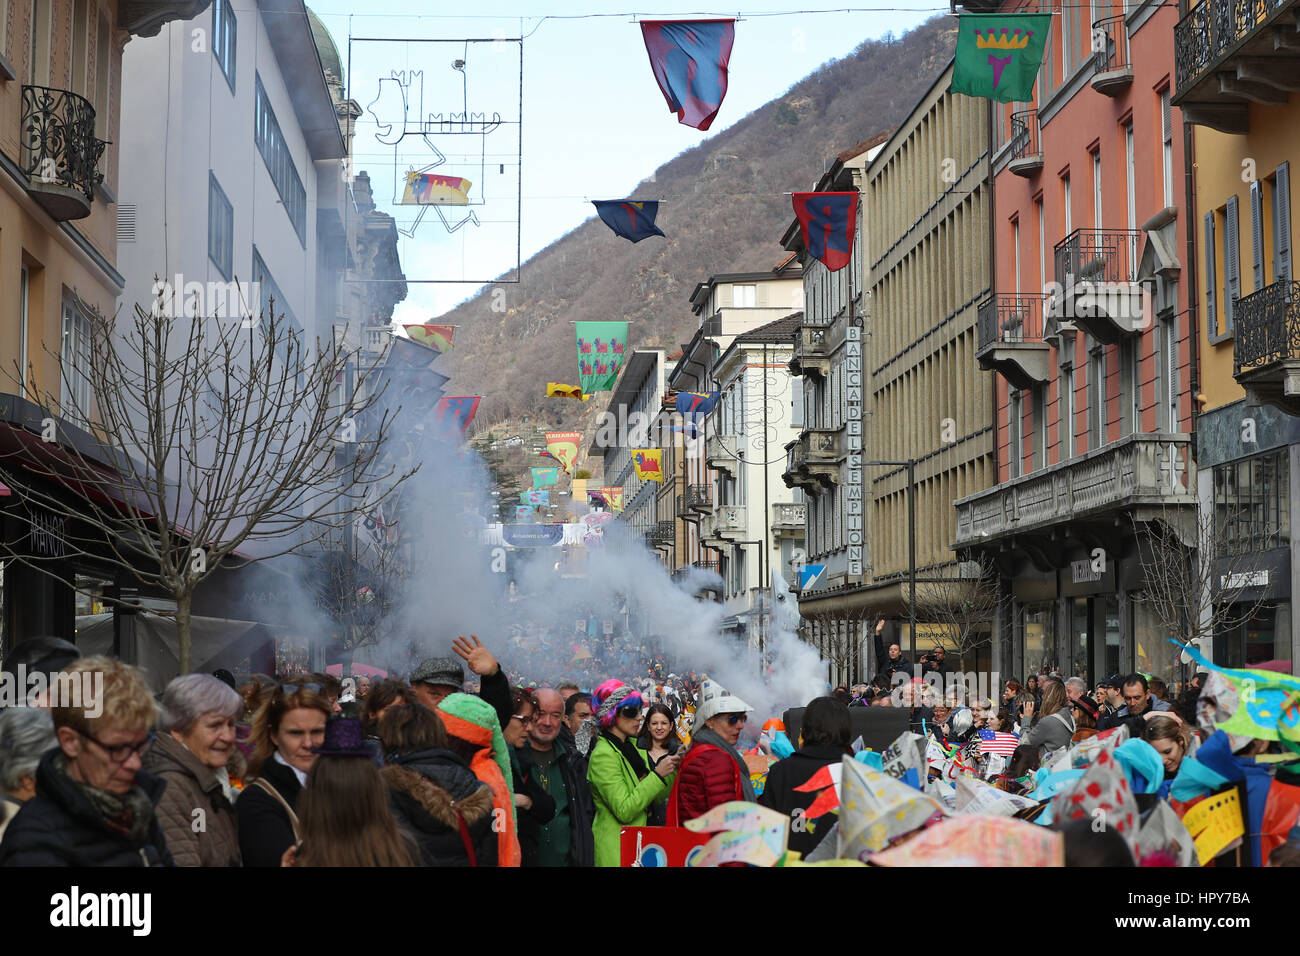 Bellinzona, Switzerland-February 24,2017: Big crowd, marching bands, guggen music and colorful masks at the Rabadan Carnival 2017 opening parade Stock Photo